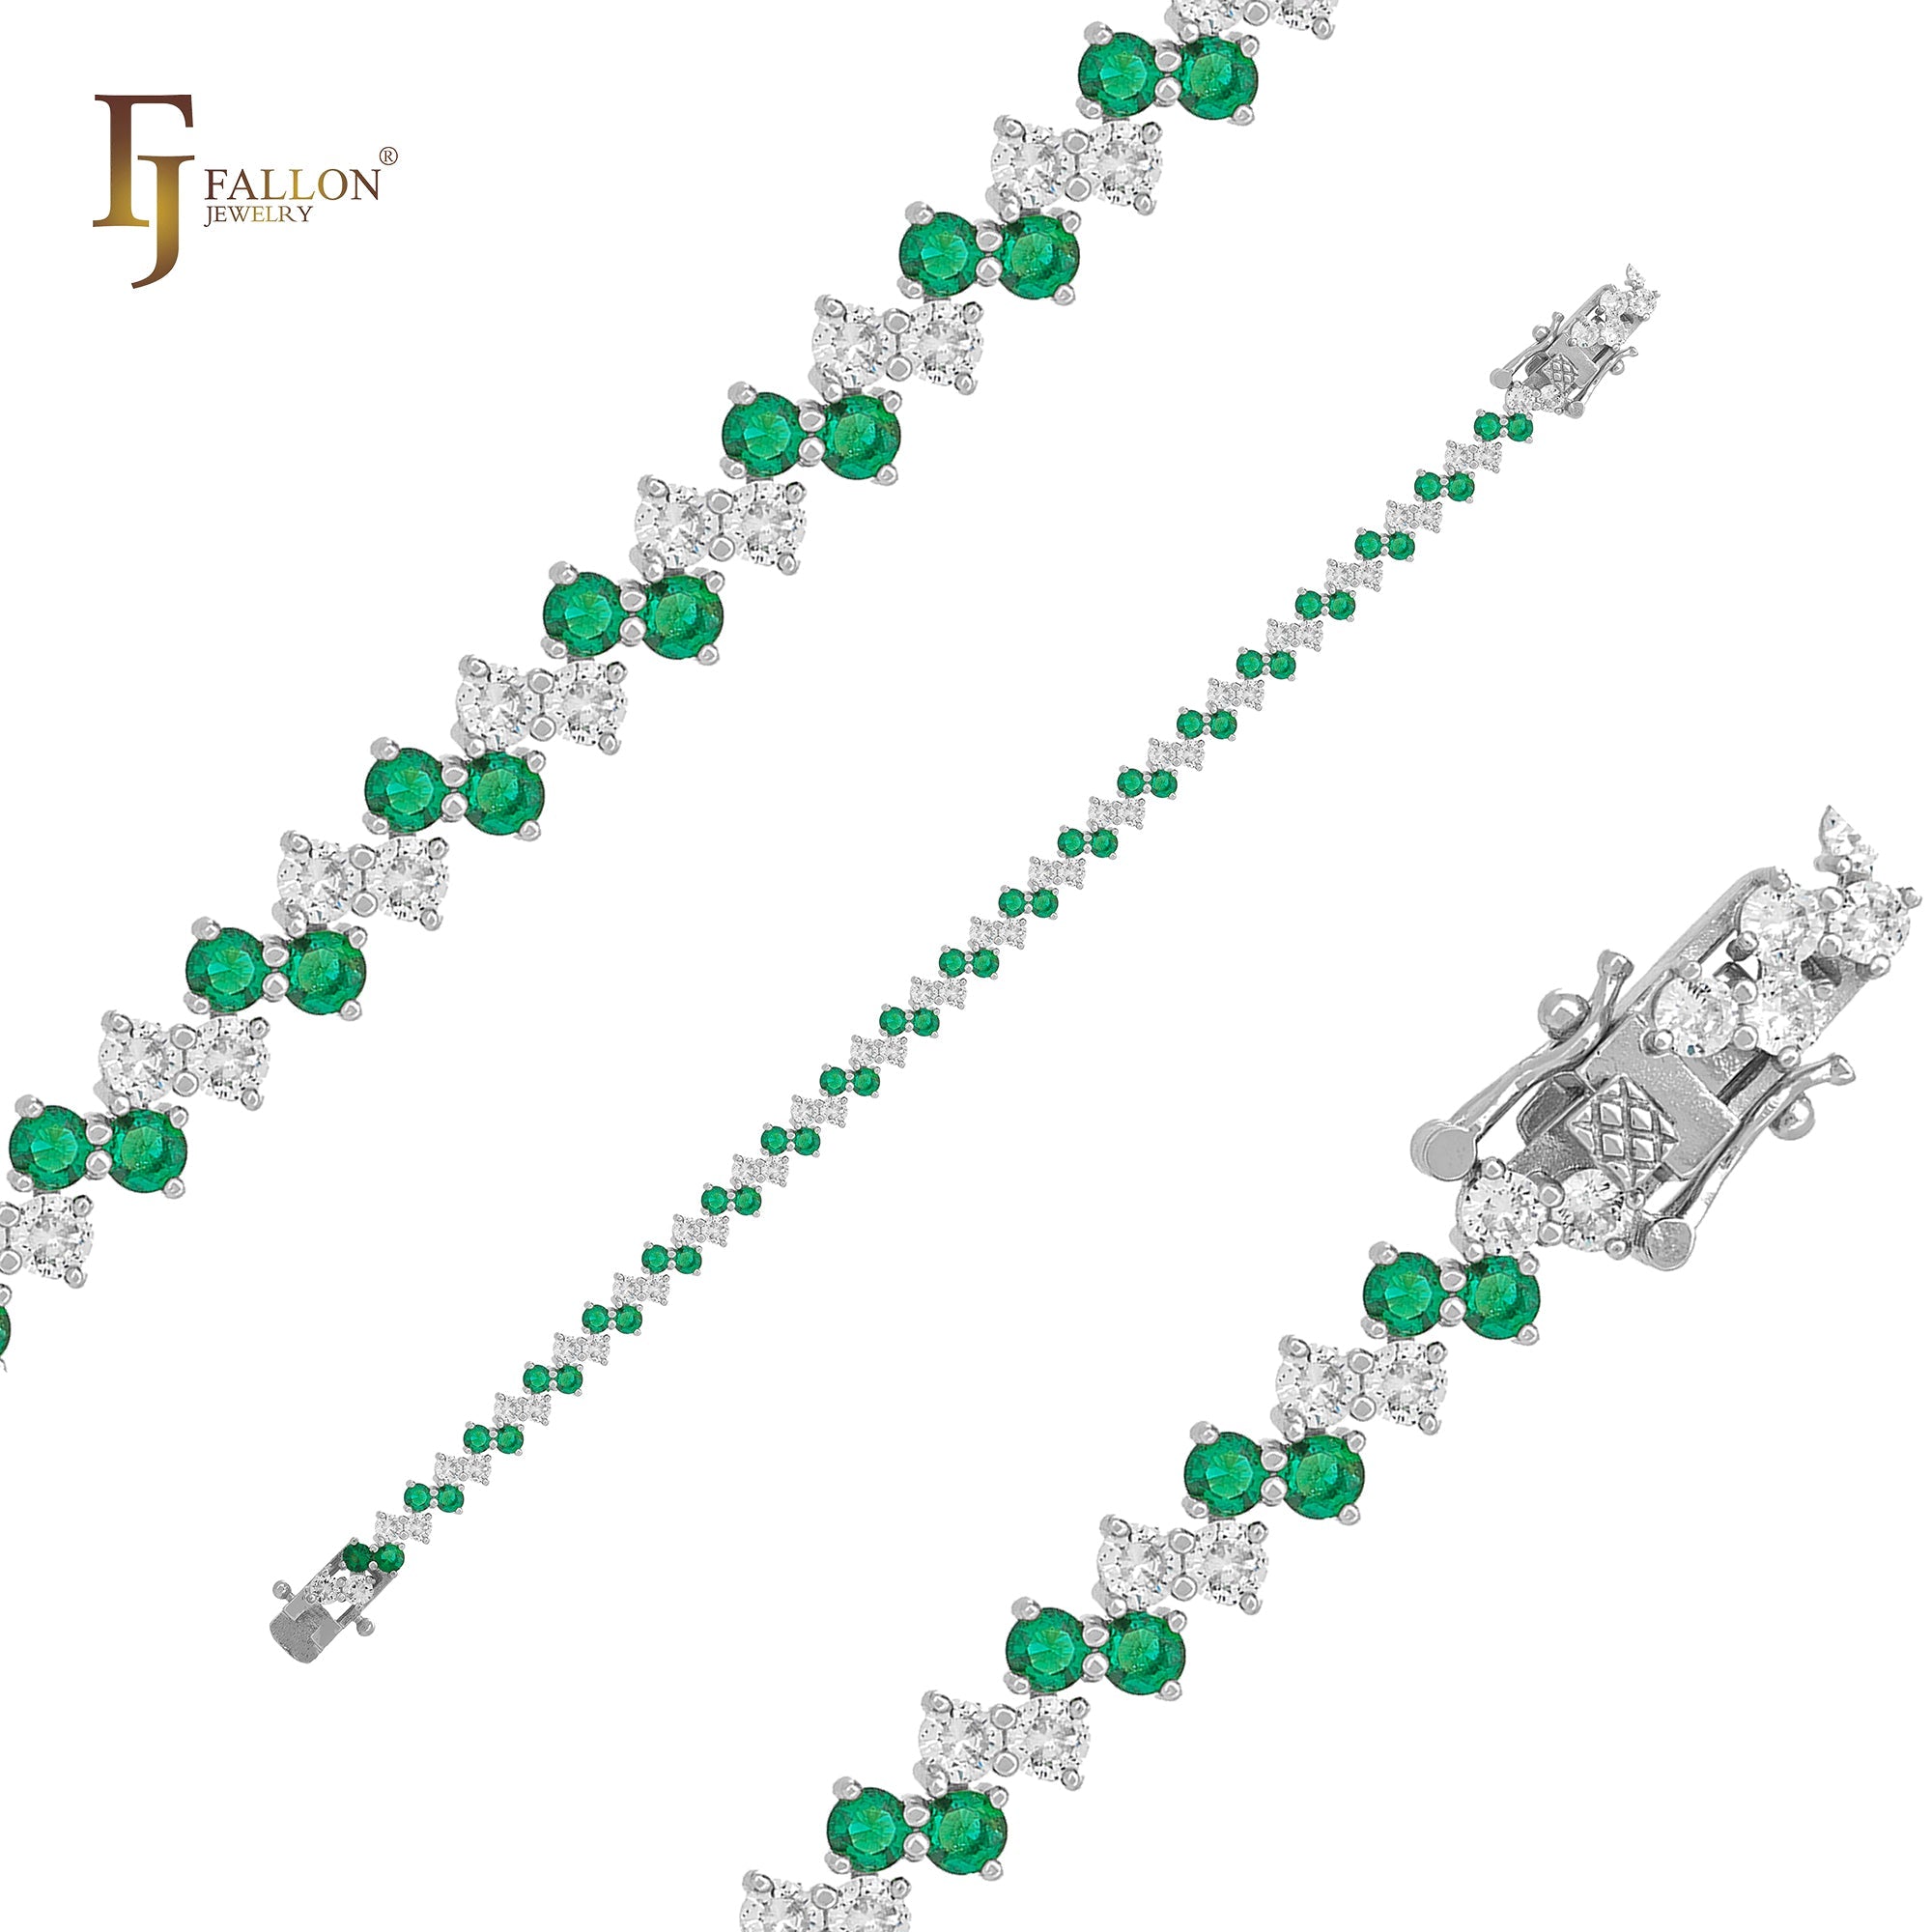 New developing double layer double CZs link Emerald mixed White CZs 14K Gold, Rose Gold, White Gold Bracelets